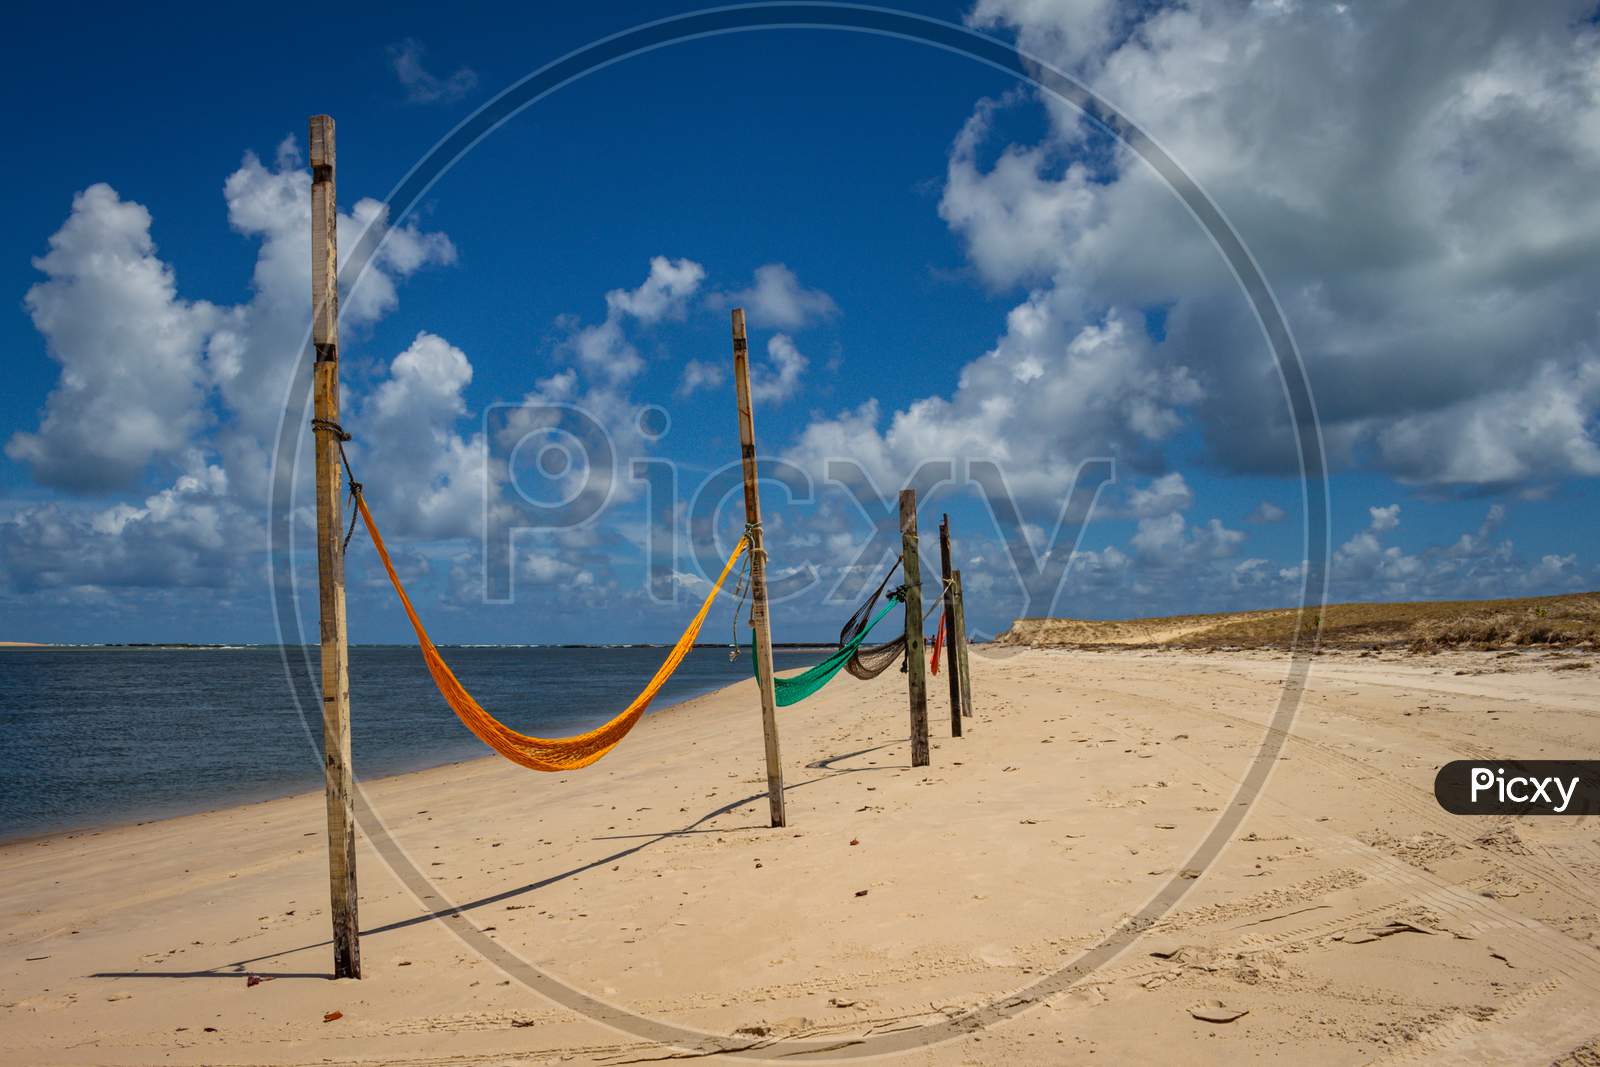 Hammocks To Rest On The Edge Of The Beach Tied To Stakes.